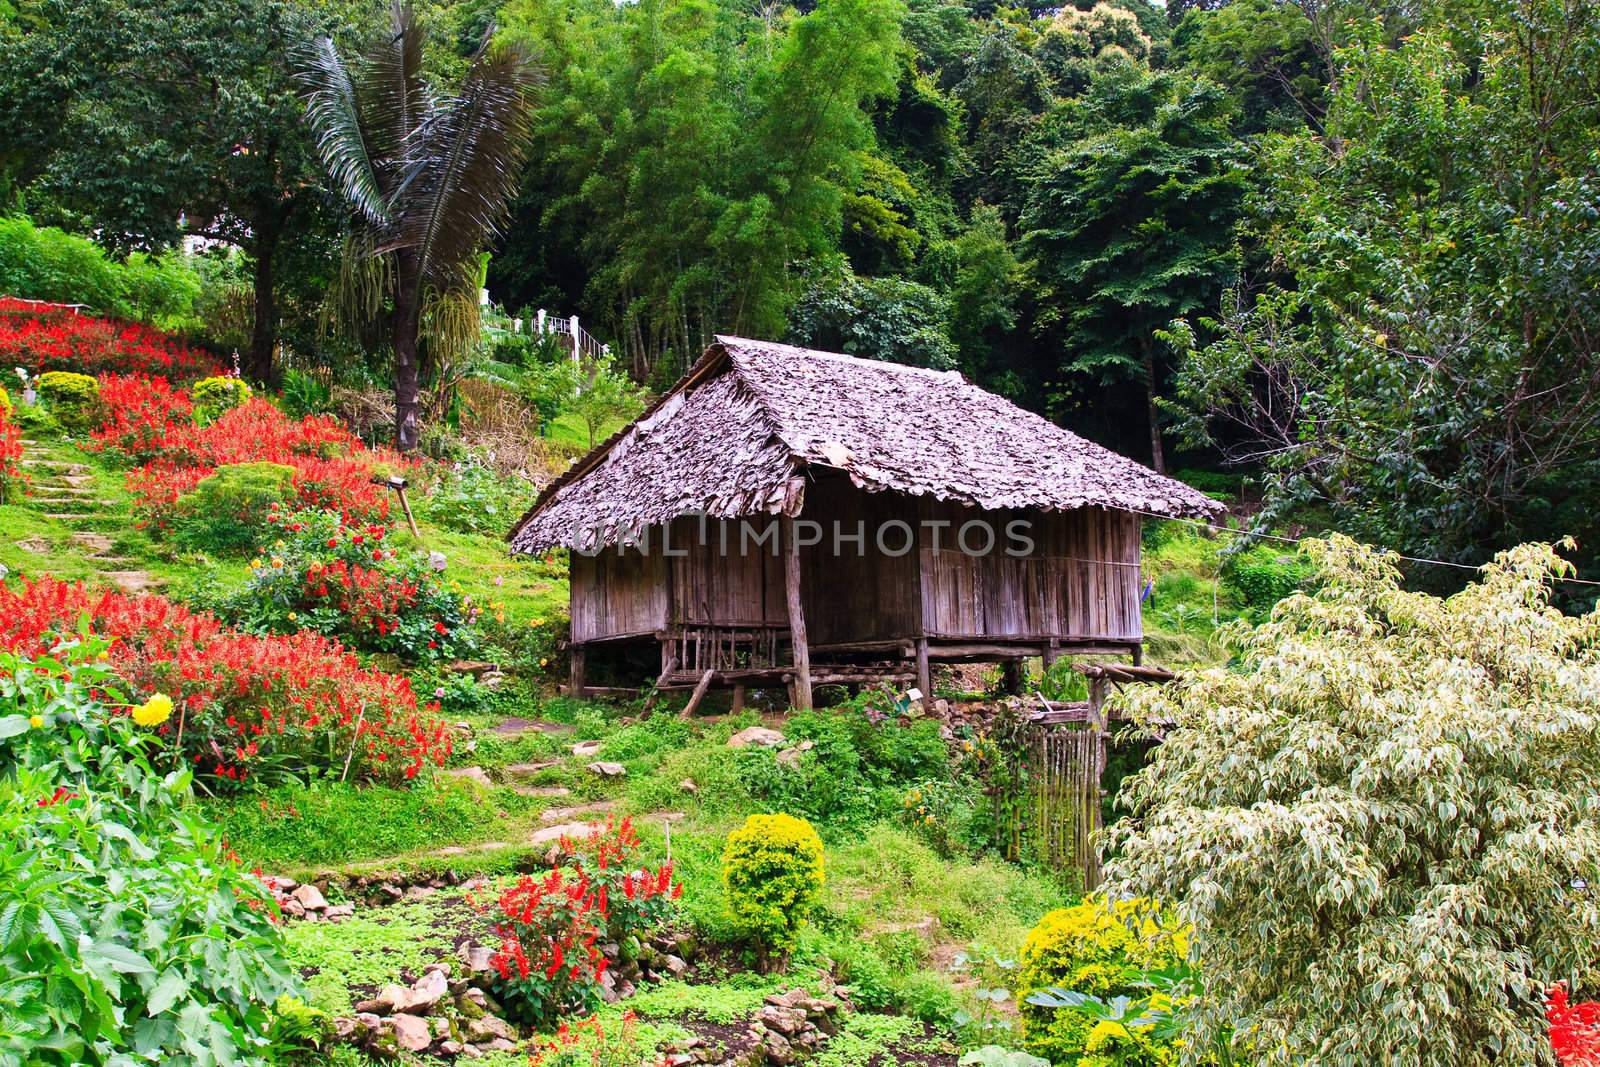 Thia hill-tribe style hut in Chiang Mai